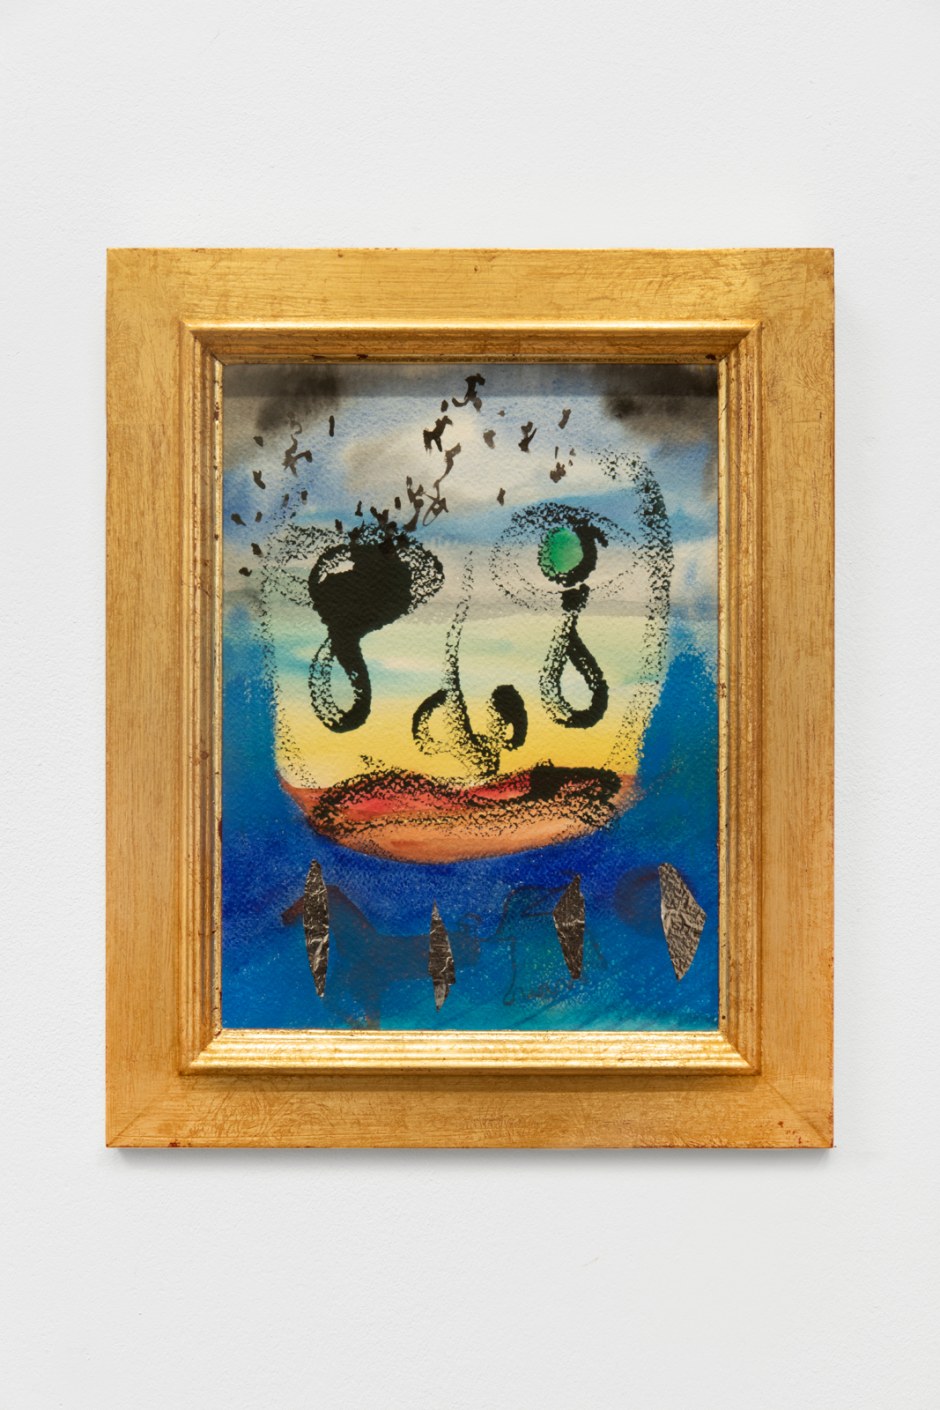 The Cat’s Whiskers / Sky, 2022  watercolour on paper, foil  site size: 30.5 x 23 cm / 12 x 9 in frame size: 39.5 x 31.9 x 2.7 cm / 15 ½ x 12 ½ x 1 in  © Monster Chetwynd, courtesy Sadie Coles HQ, London  Photo: Katie Morrison